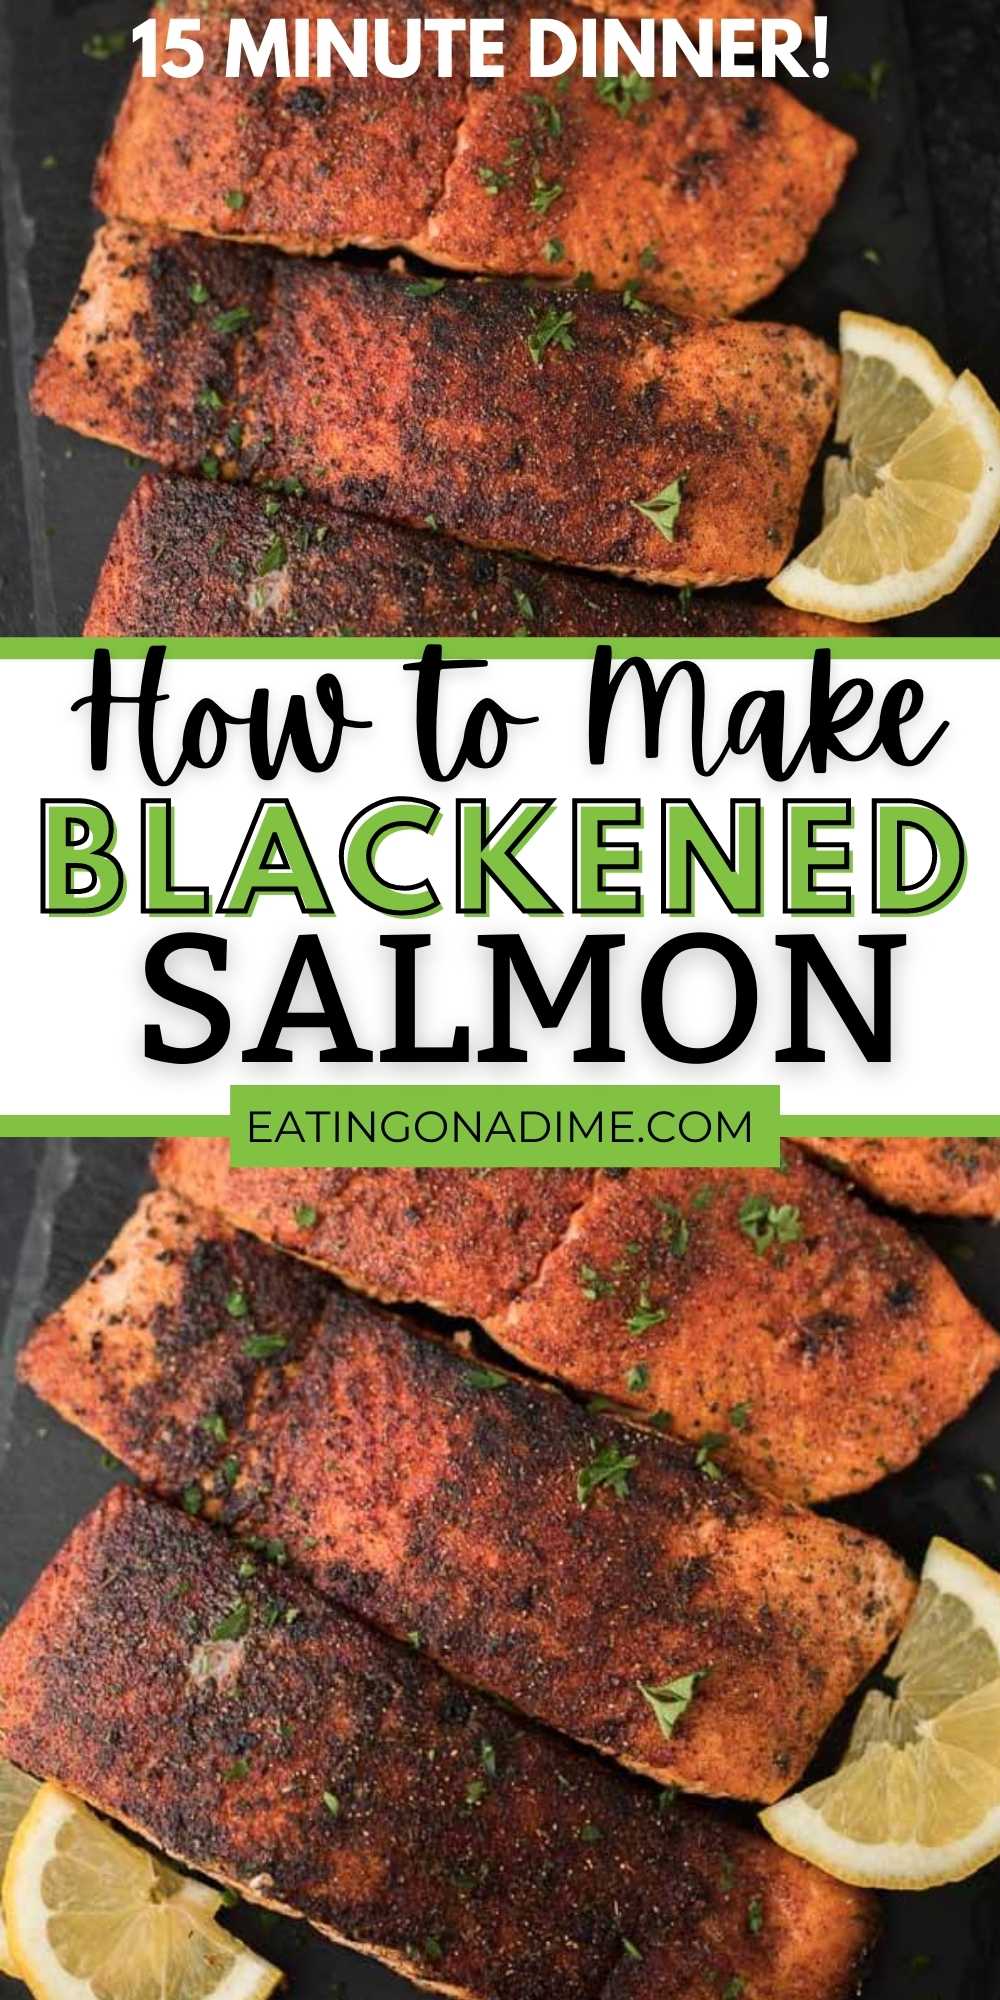 You are going to love this easy blackened salmon recipe that is ready in only 10 minutes. This is the best blackened salmon recipe that is quick and easy. It is the best way to cook salmon! It’s easy to make and delicious too! #eatingonadime #salmonrecipes #seafoodrecipes #blackenedrecipes #stovetoprecipes 
